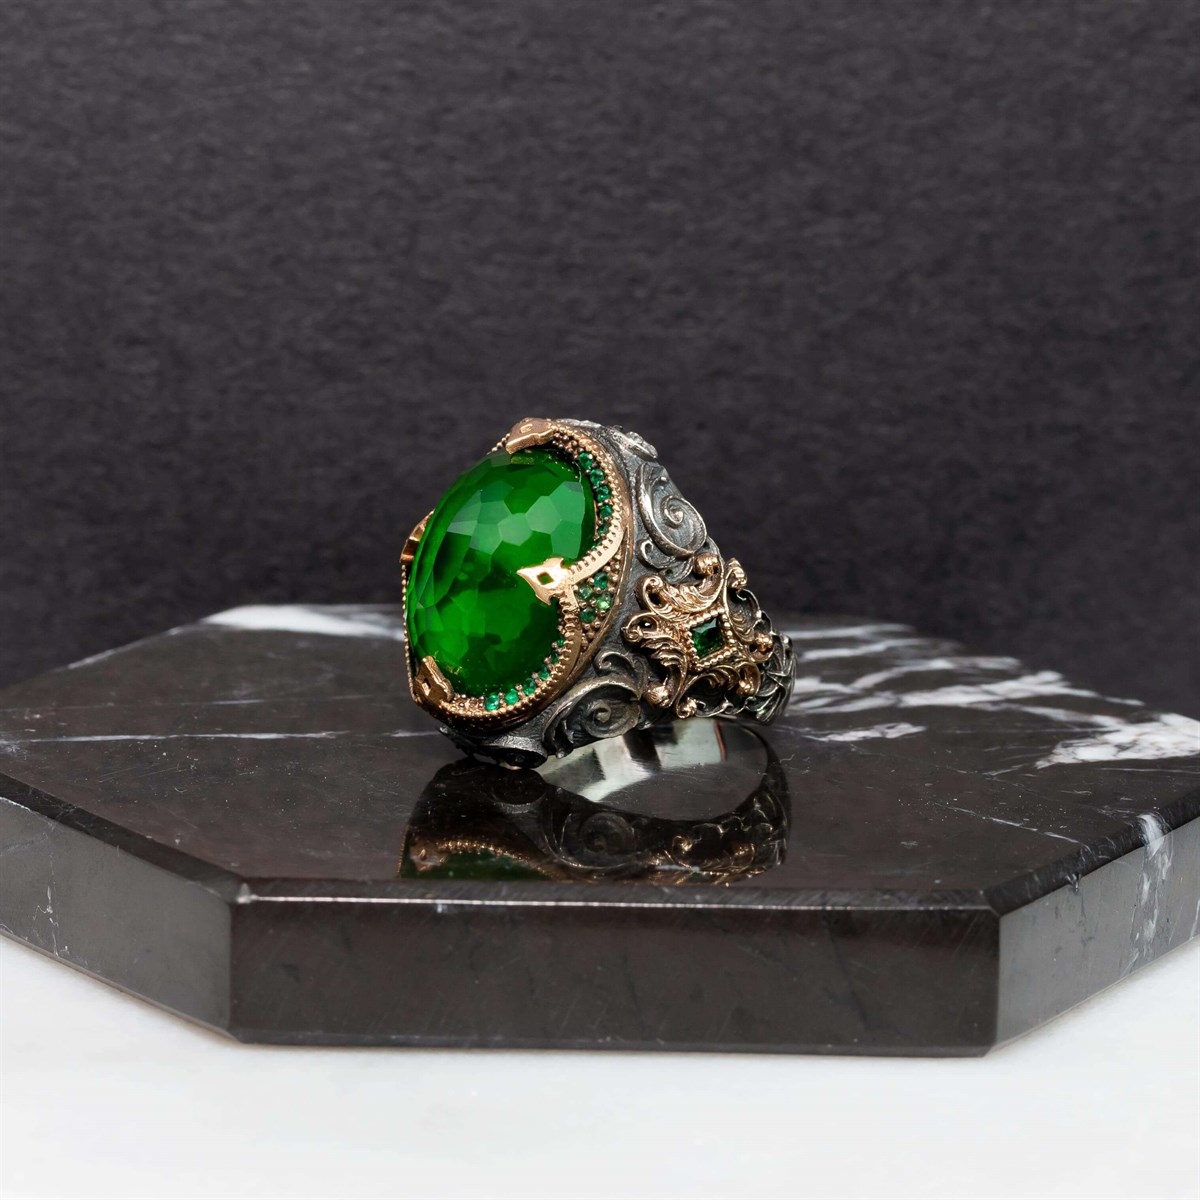 Green Zircon Stone Embroidered Sterling Silver Men's Ring